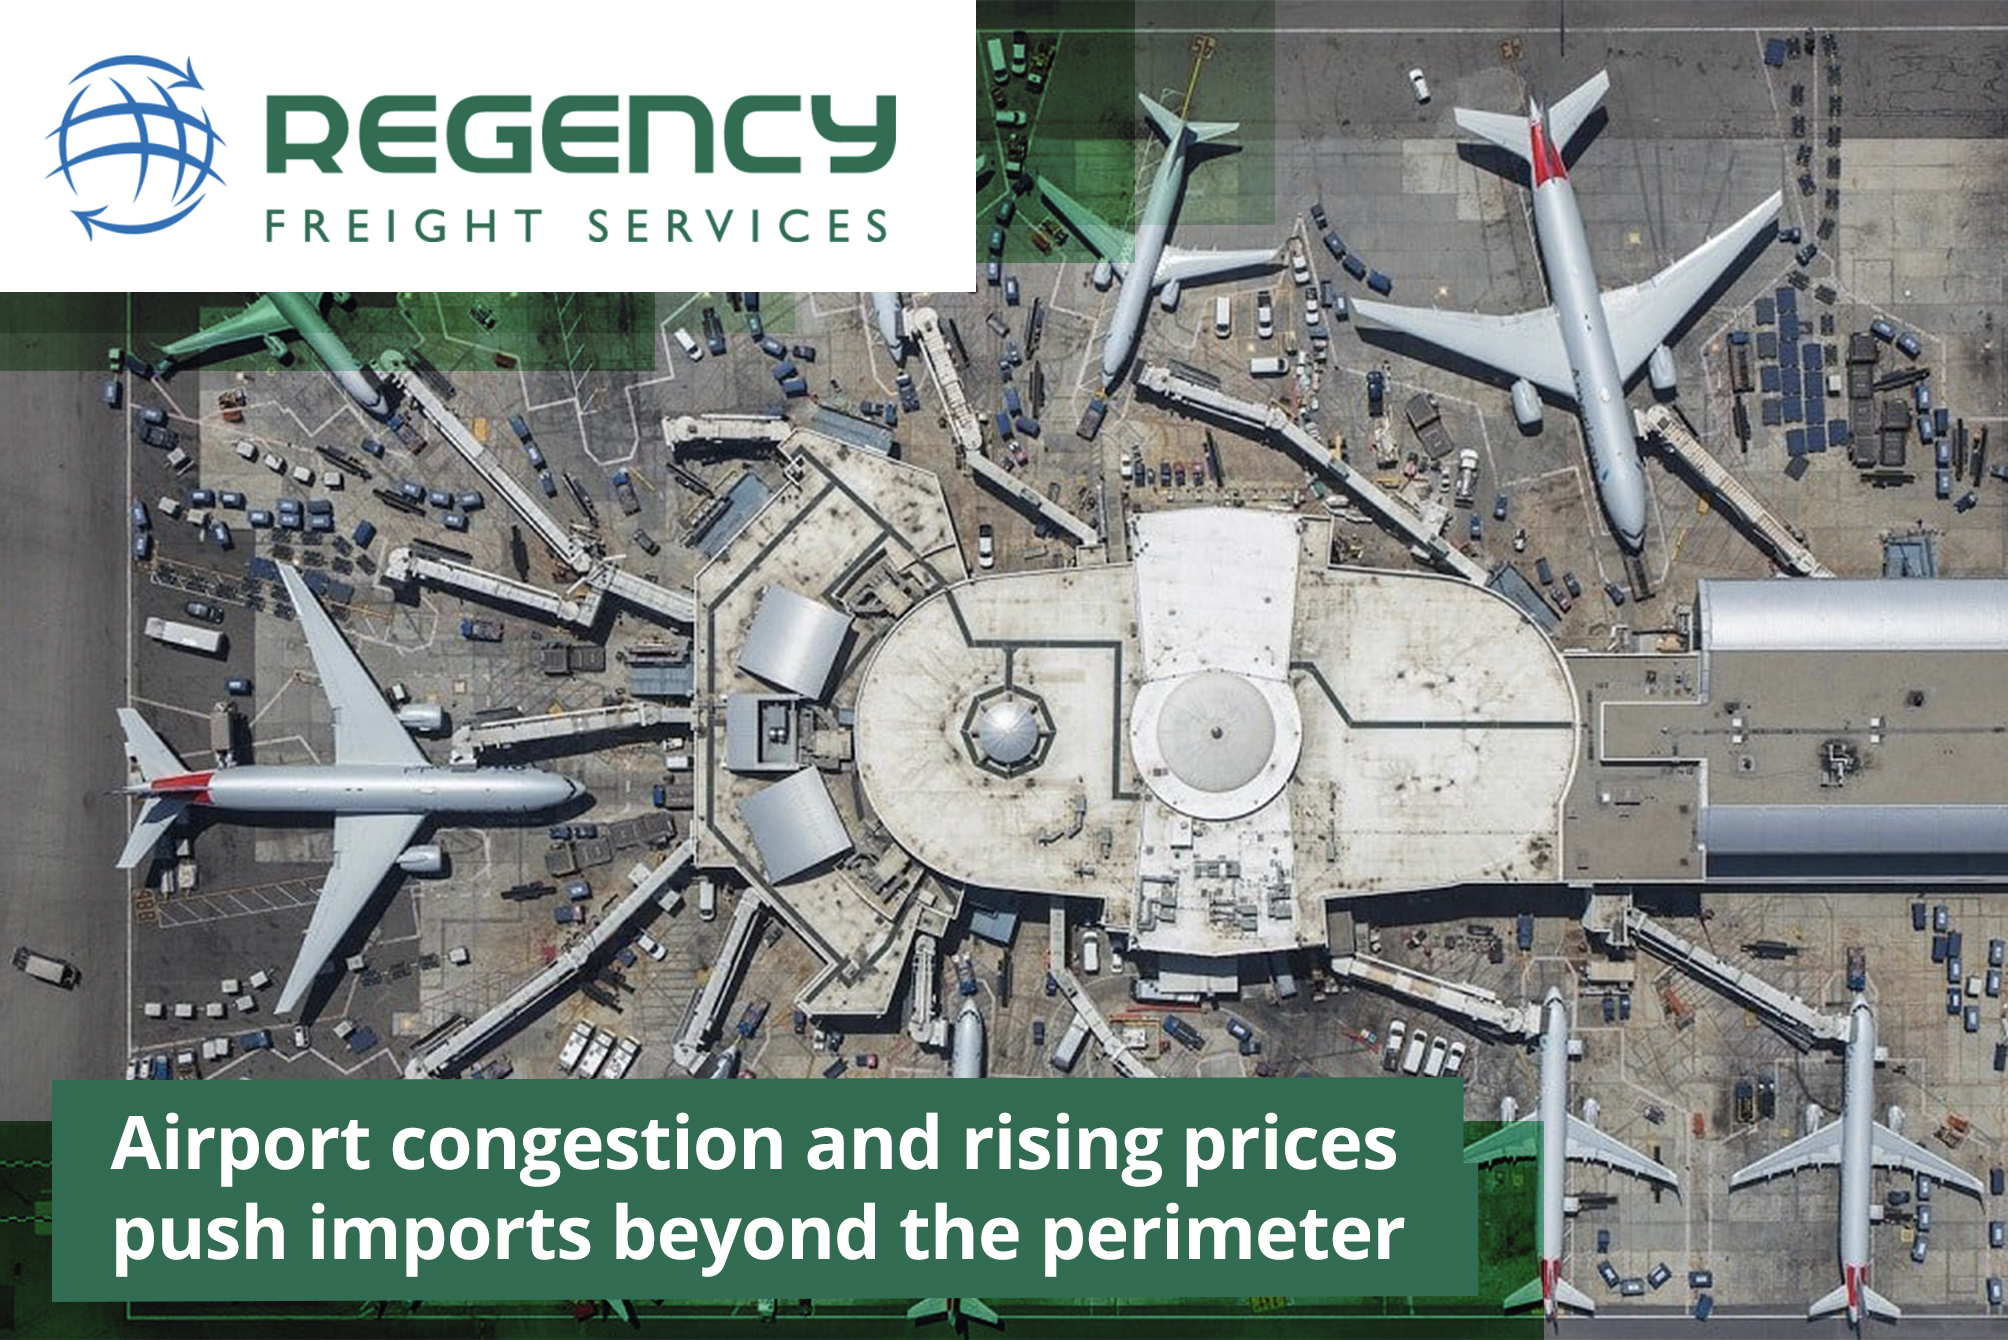 Airport congestion and rising prices push imports beyond the perimeter